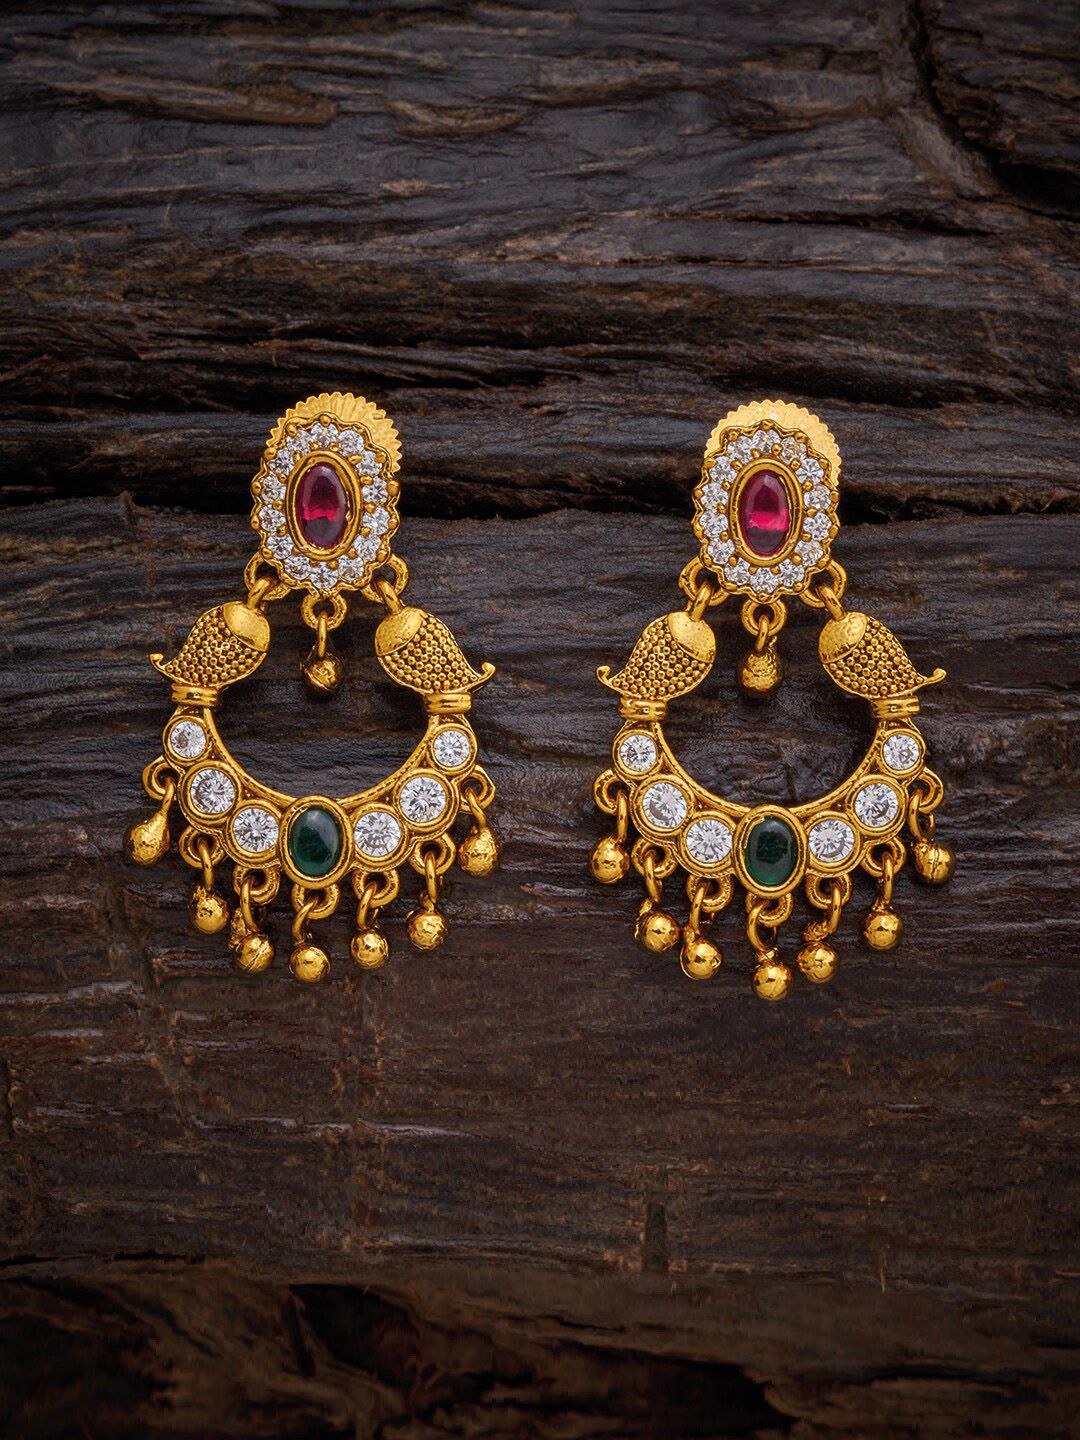 Kushal's Fashion Jewellery Red Crescent Shaped Chandbalis Earrings Price in India